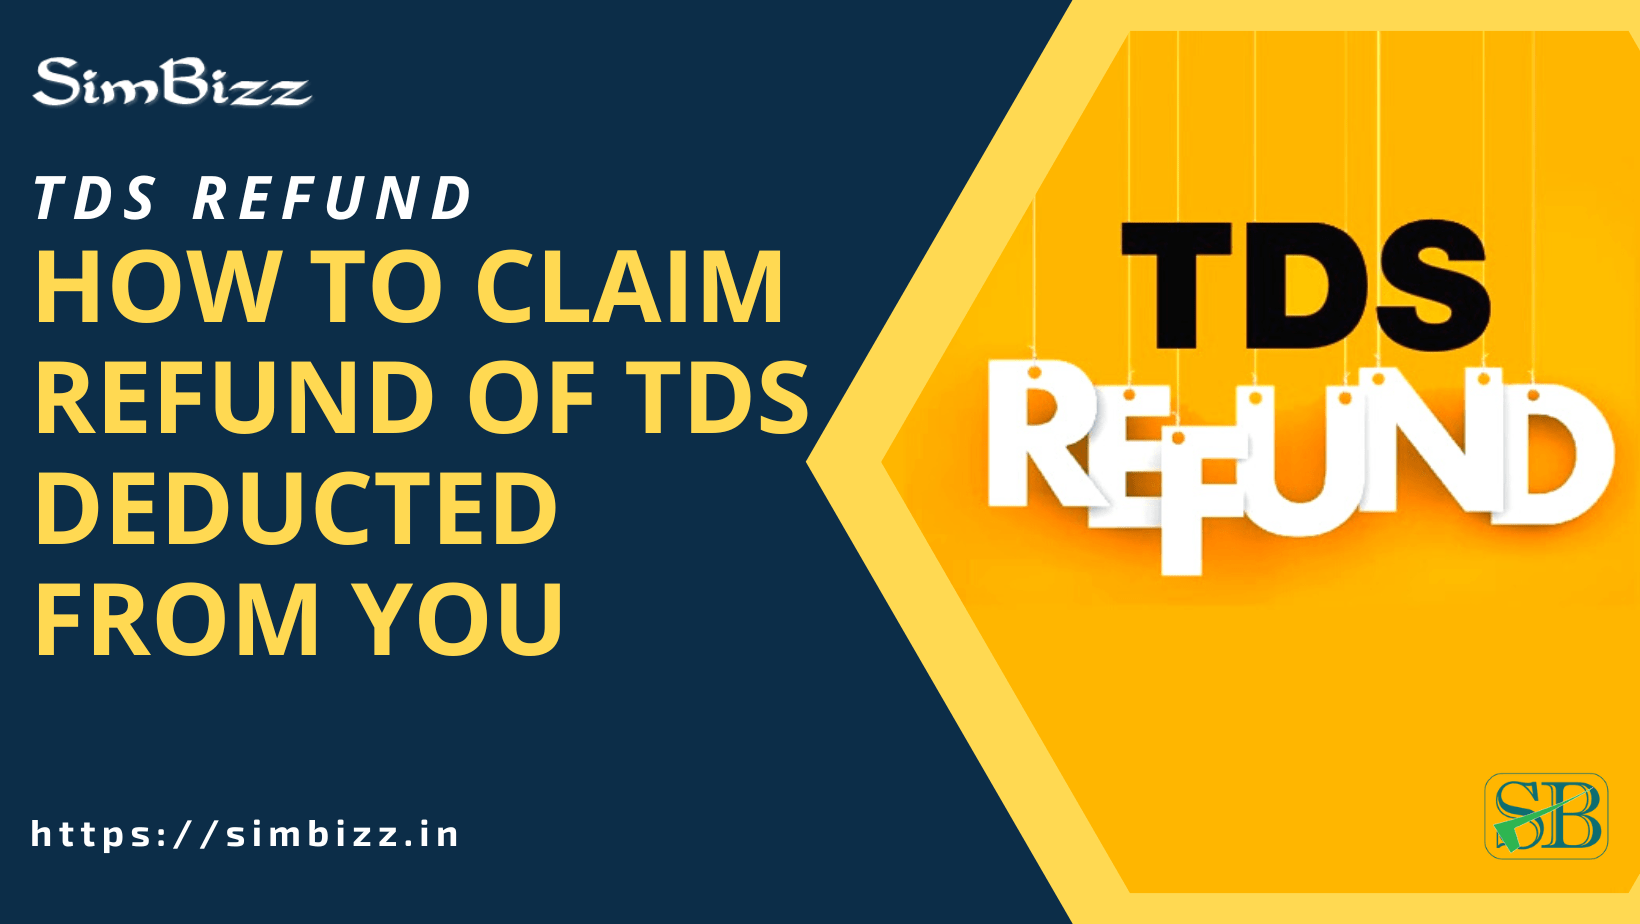 how-to-claim-refund-of-tds-deducted-from-you-tds-refund-simbizz